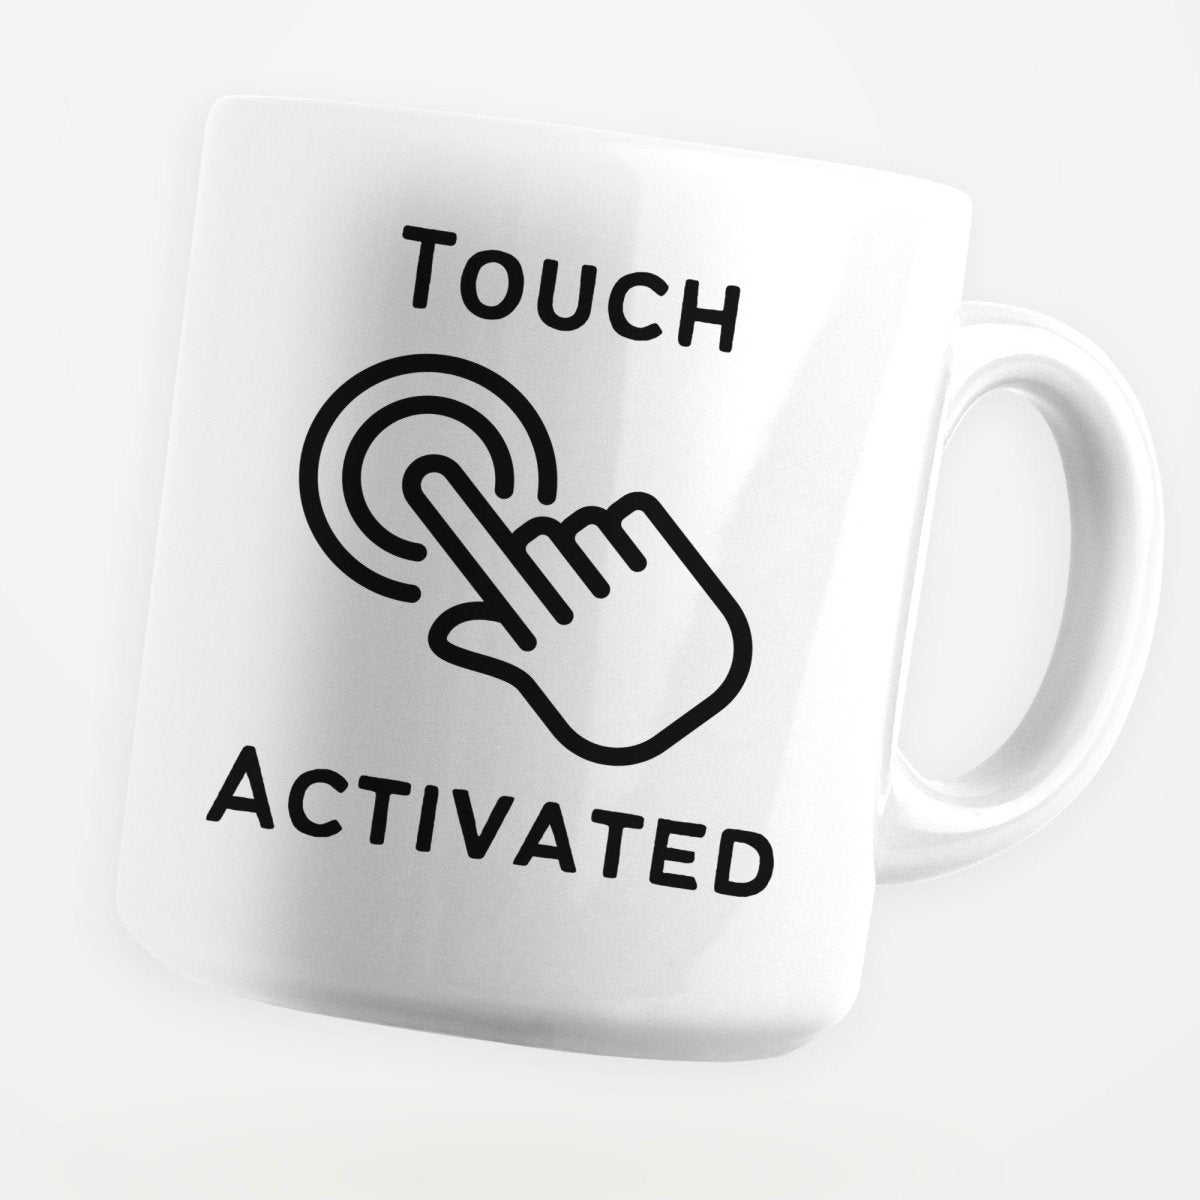 Touch Activated 11oz Coffee Mug - stickerbullTouch Activated 11oz Coffee MugMugsstickerbullstickerbullMug_TouchActivatedTouch Activated 11oz Coffee Mug